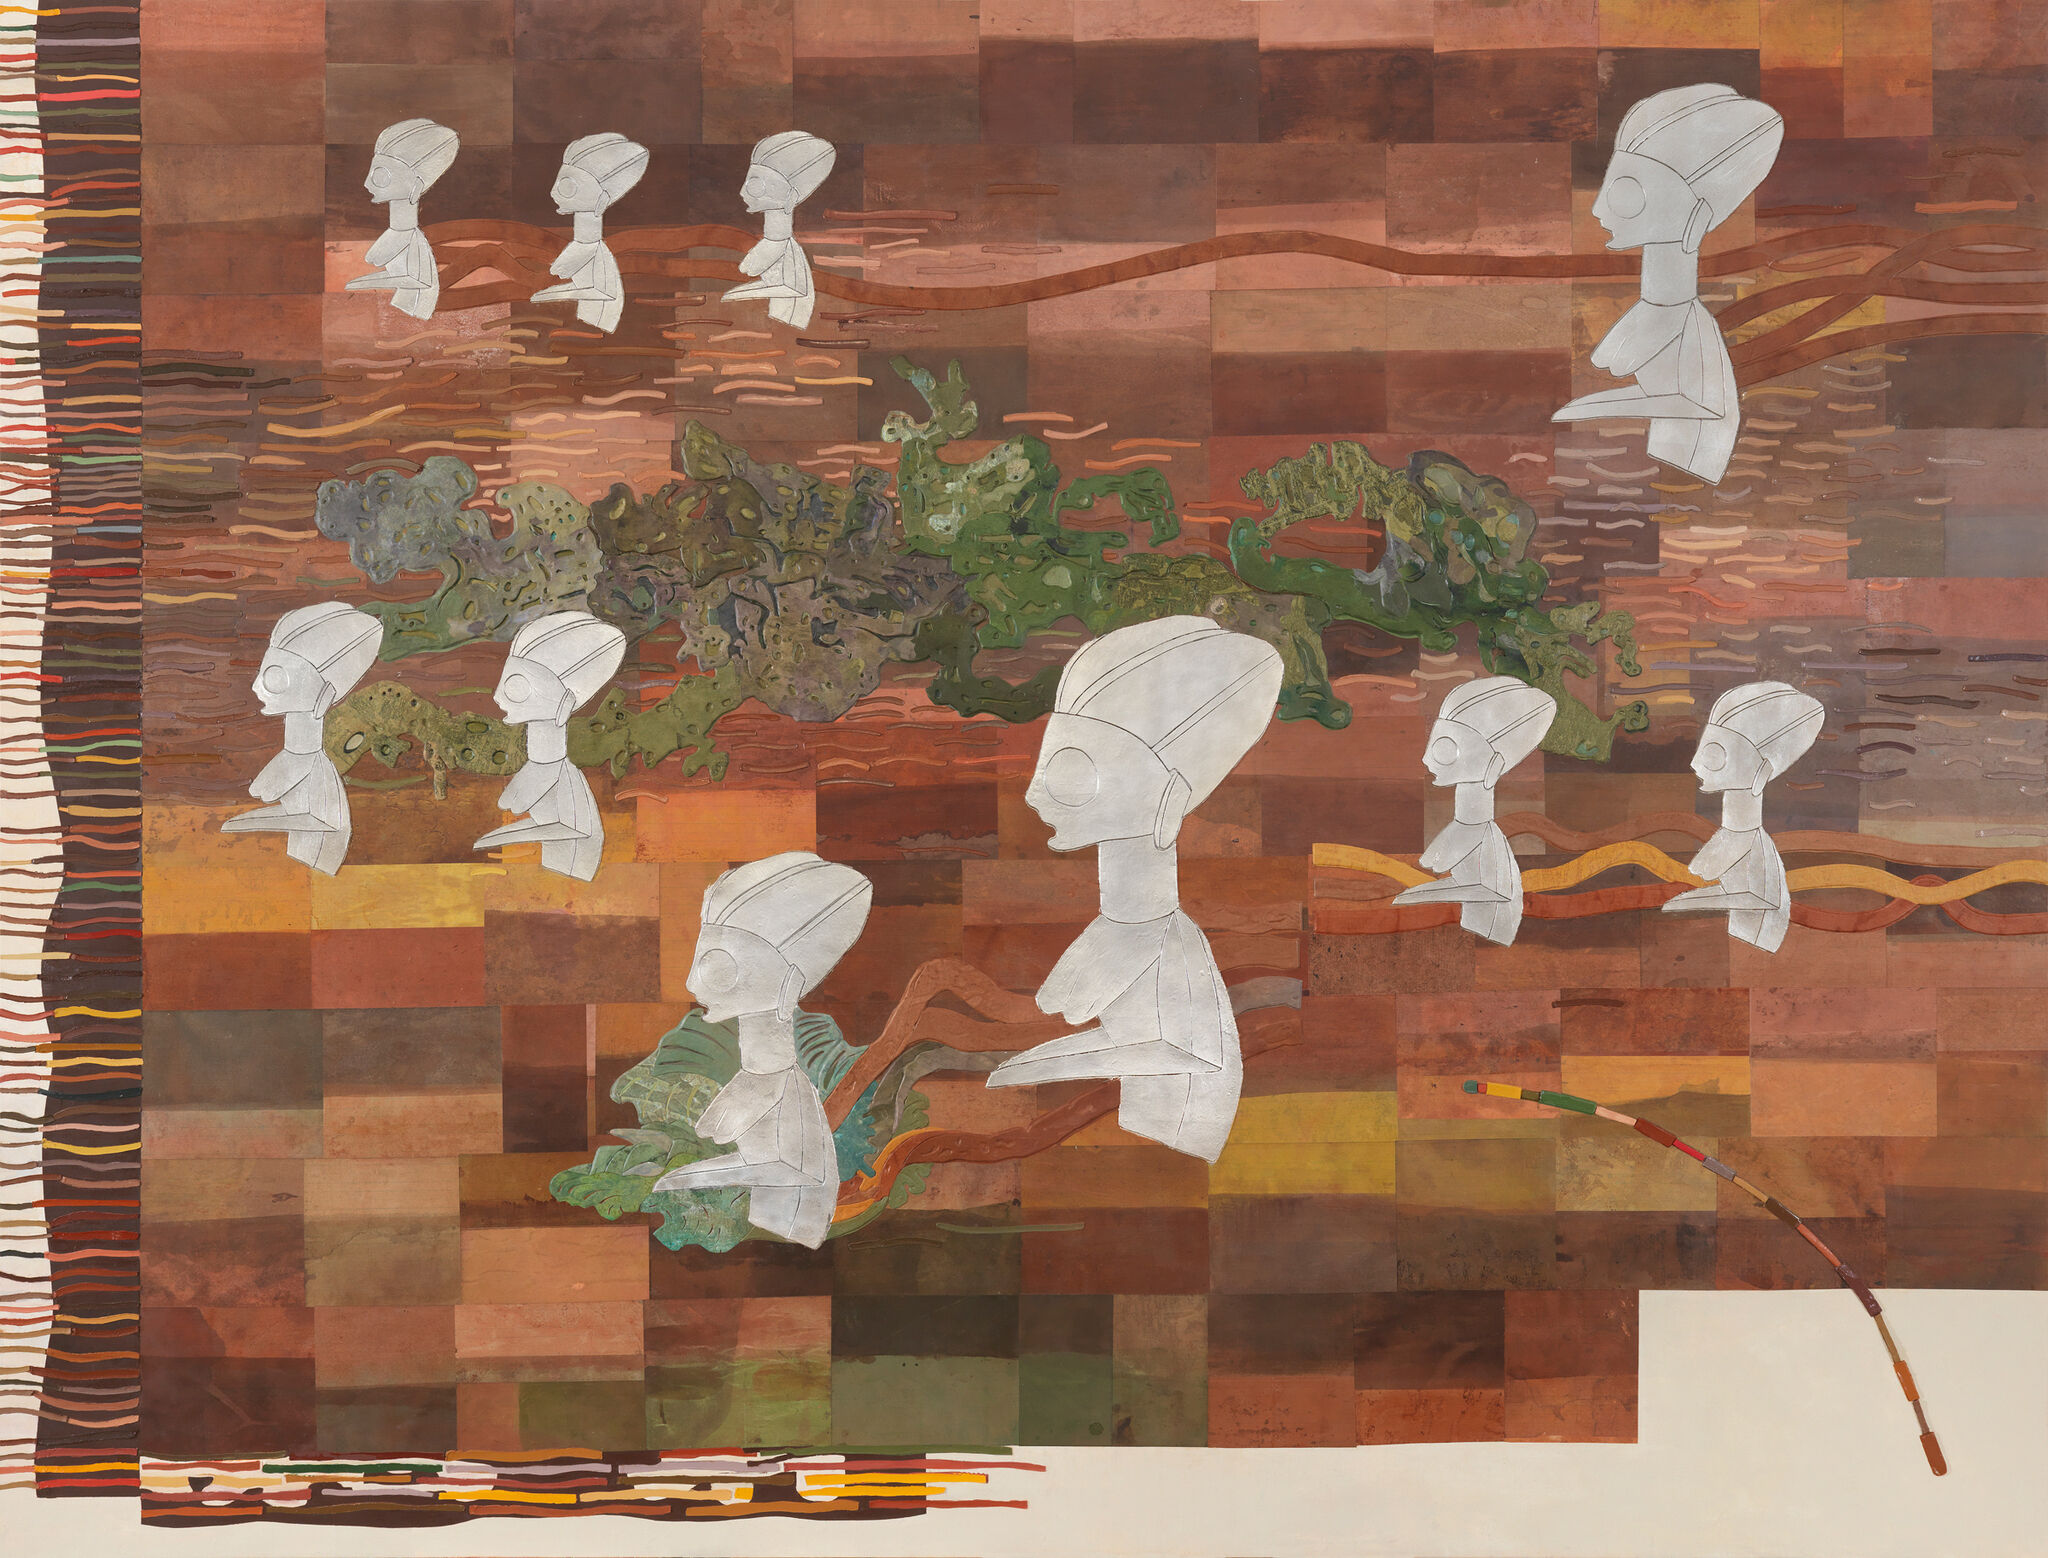 Several white, two-dimensional, human-like figures placed on a backdrop of earth tone rectangles.